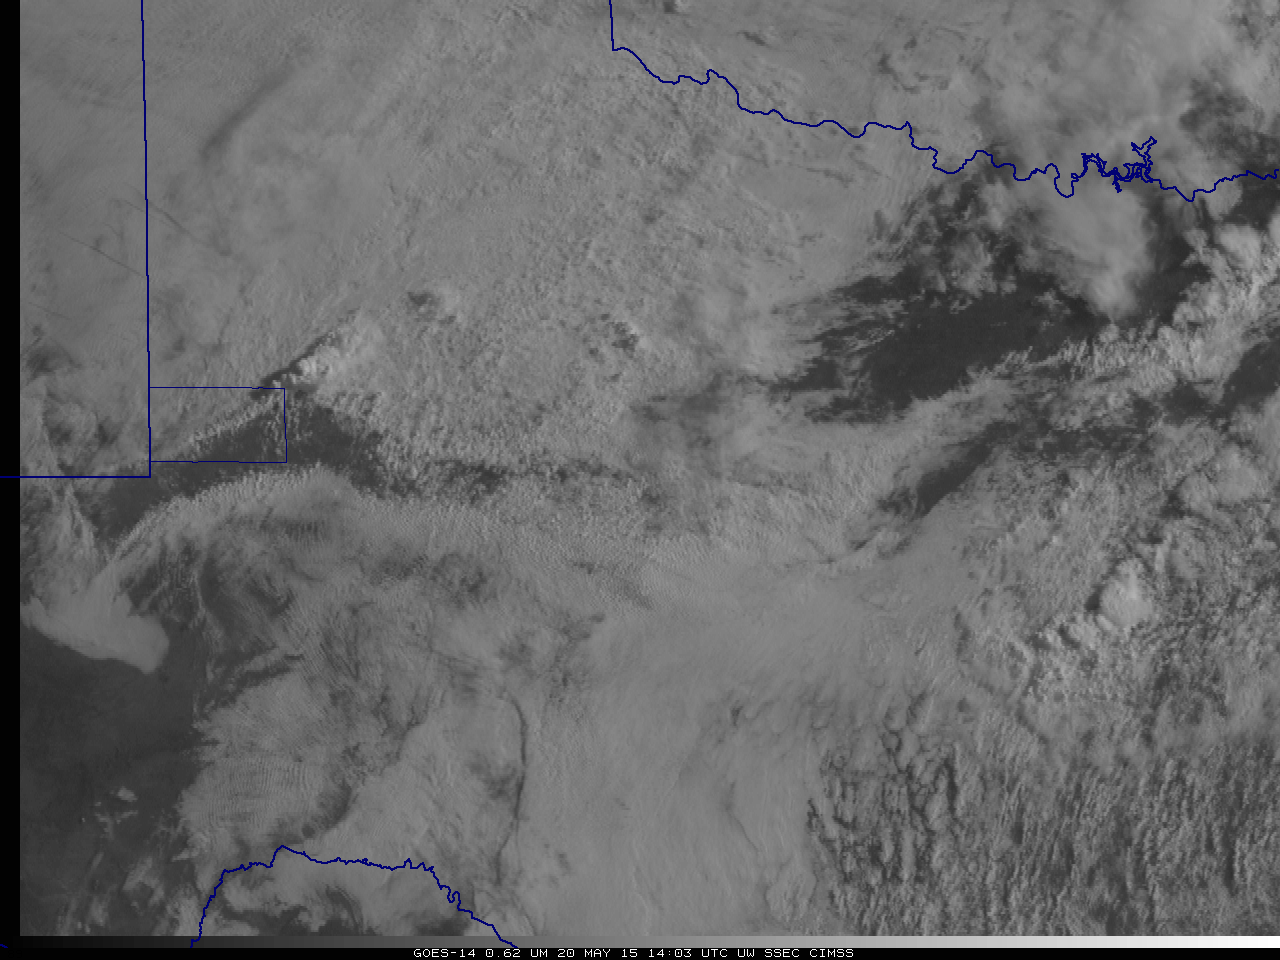 GOES-14 0.62 µm visible imagery; Andrews County is highlighted [click to play animation]